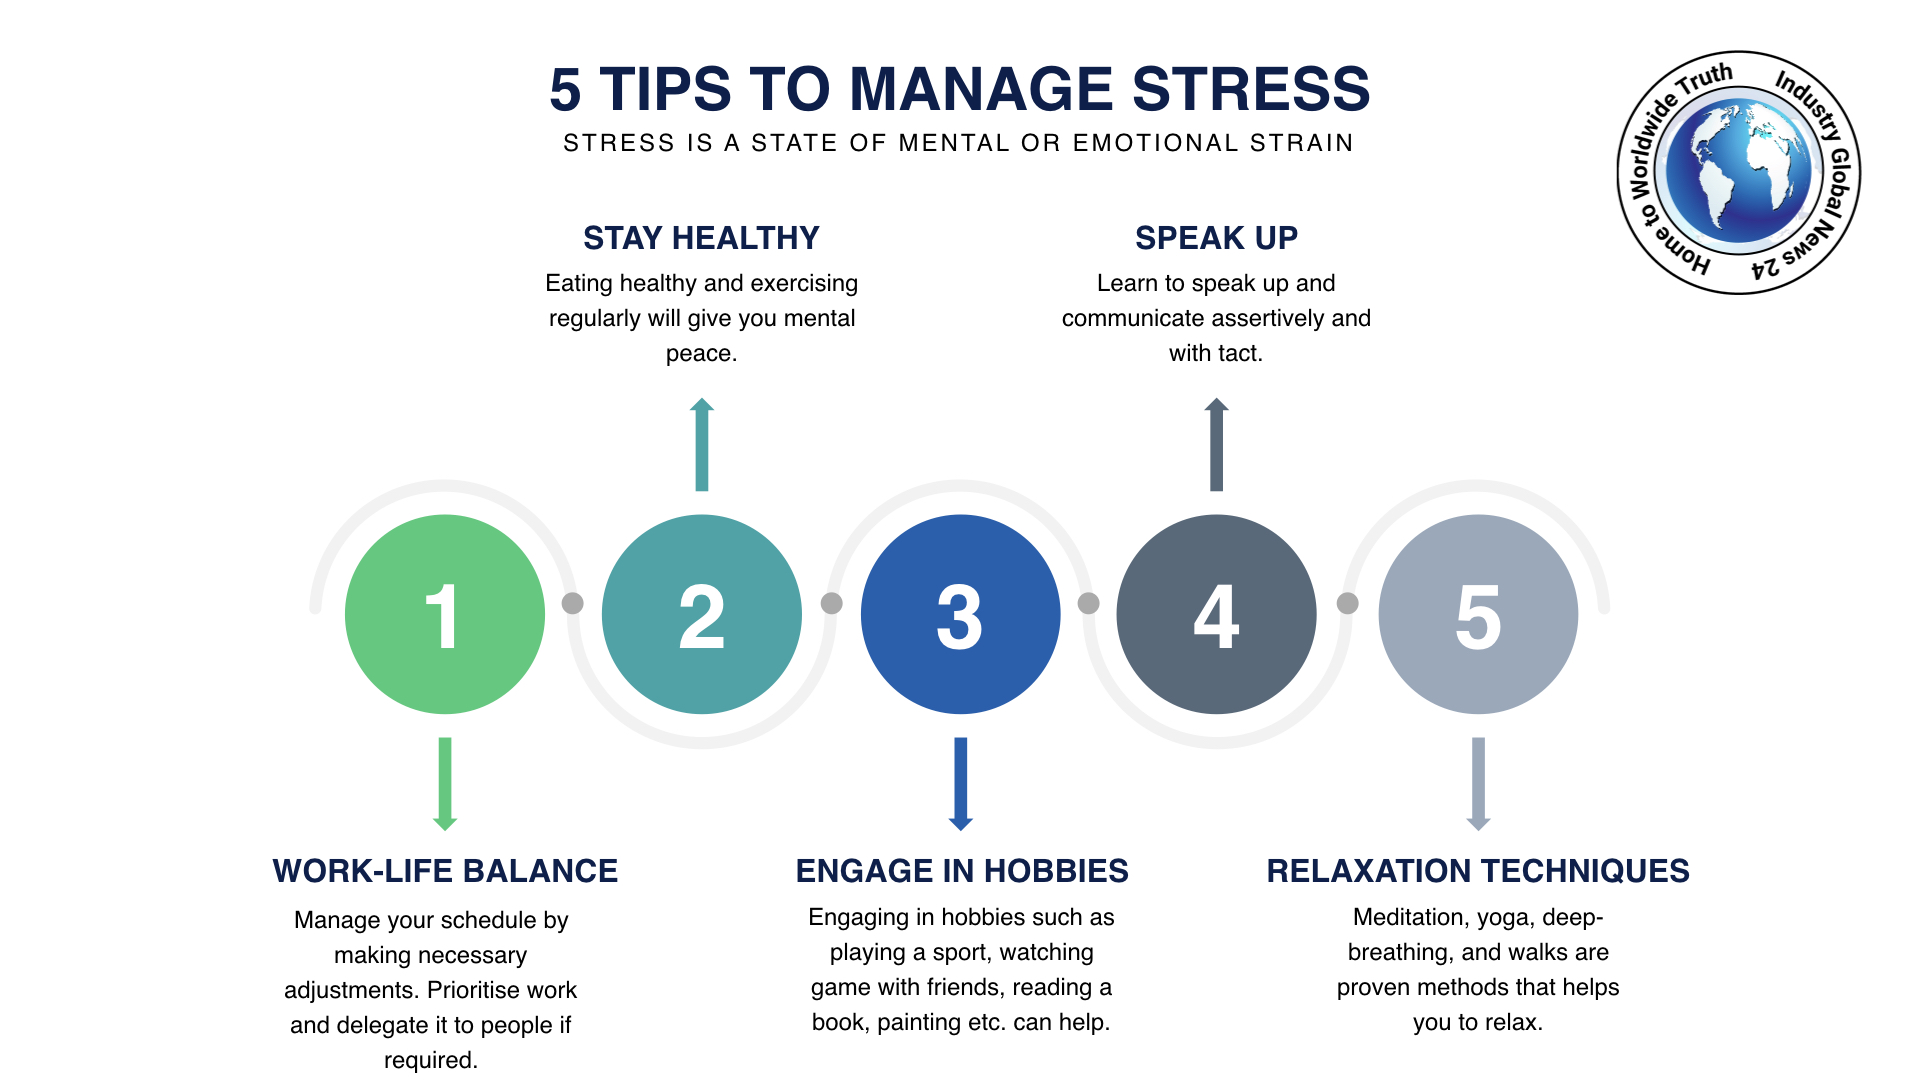 5 TIPS TO MANAGE STRESS